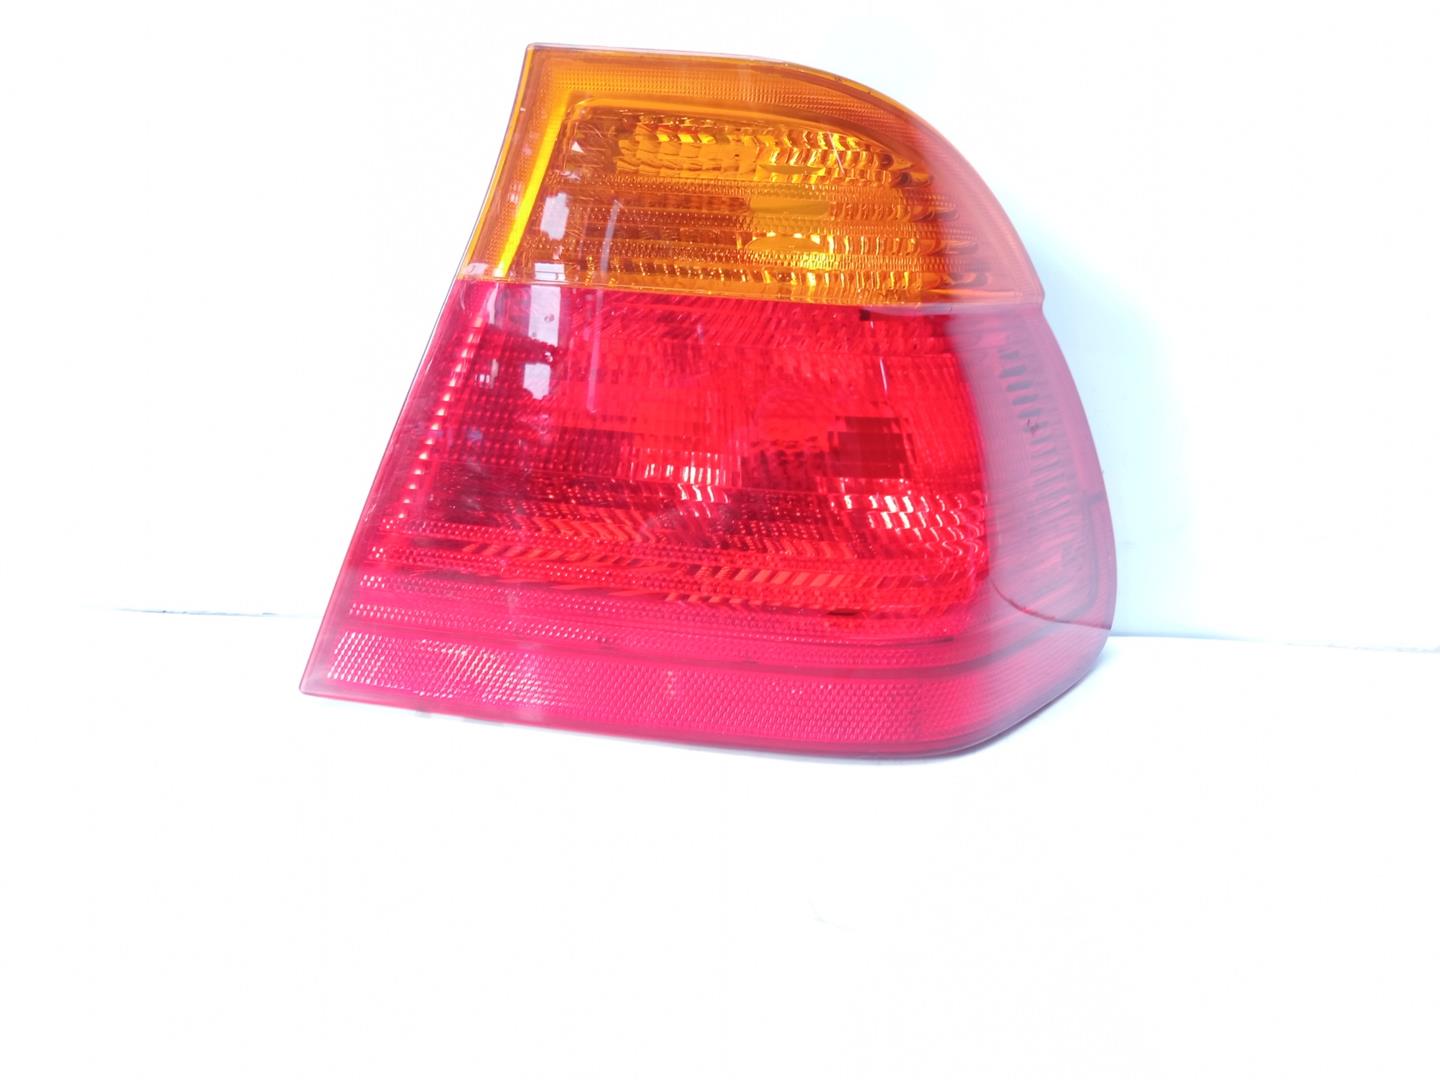 BMW 3 Series E46 (1997-2006) Rear Right Taillight Lamp 63218364922 21803665